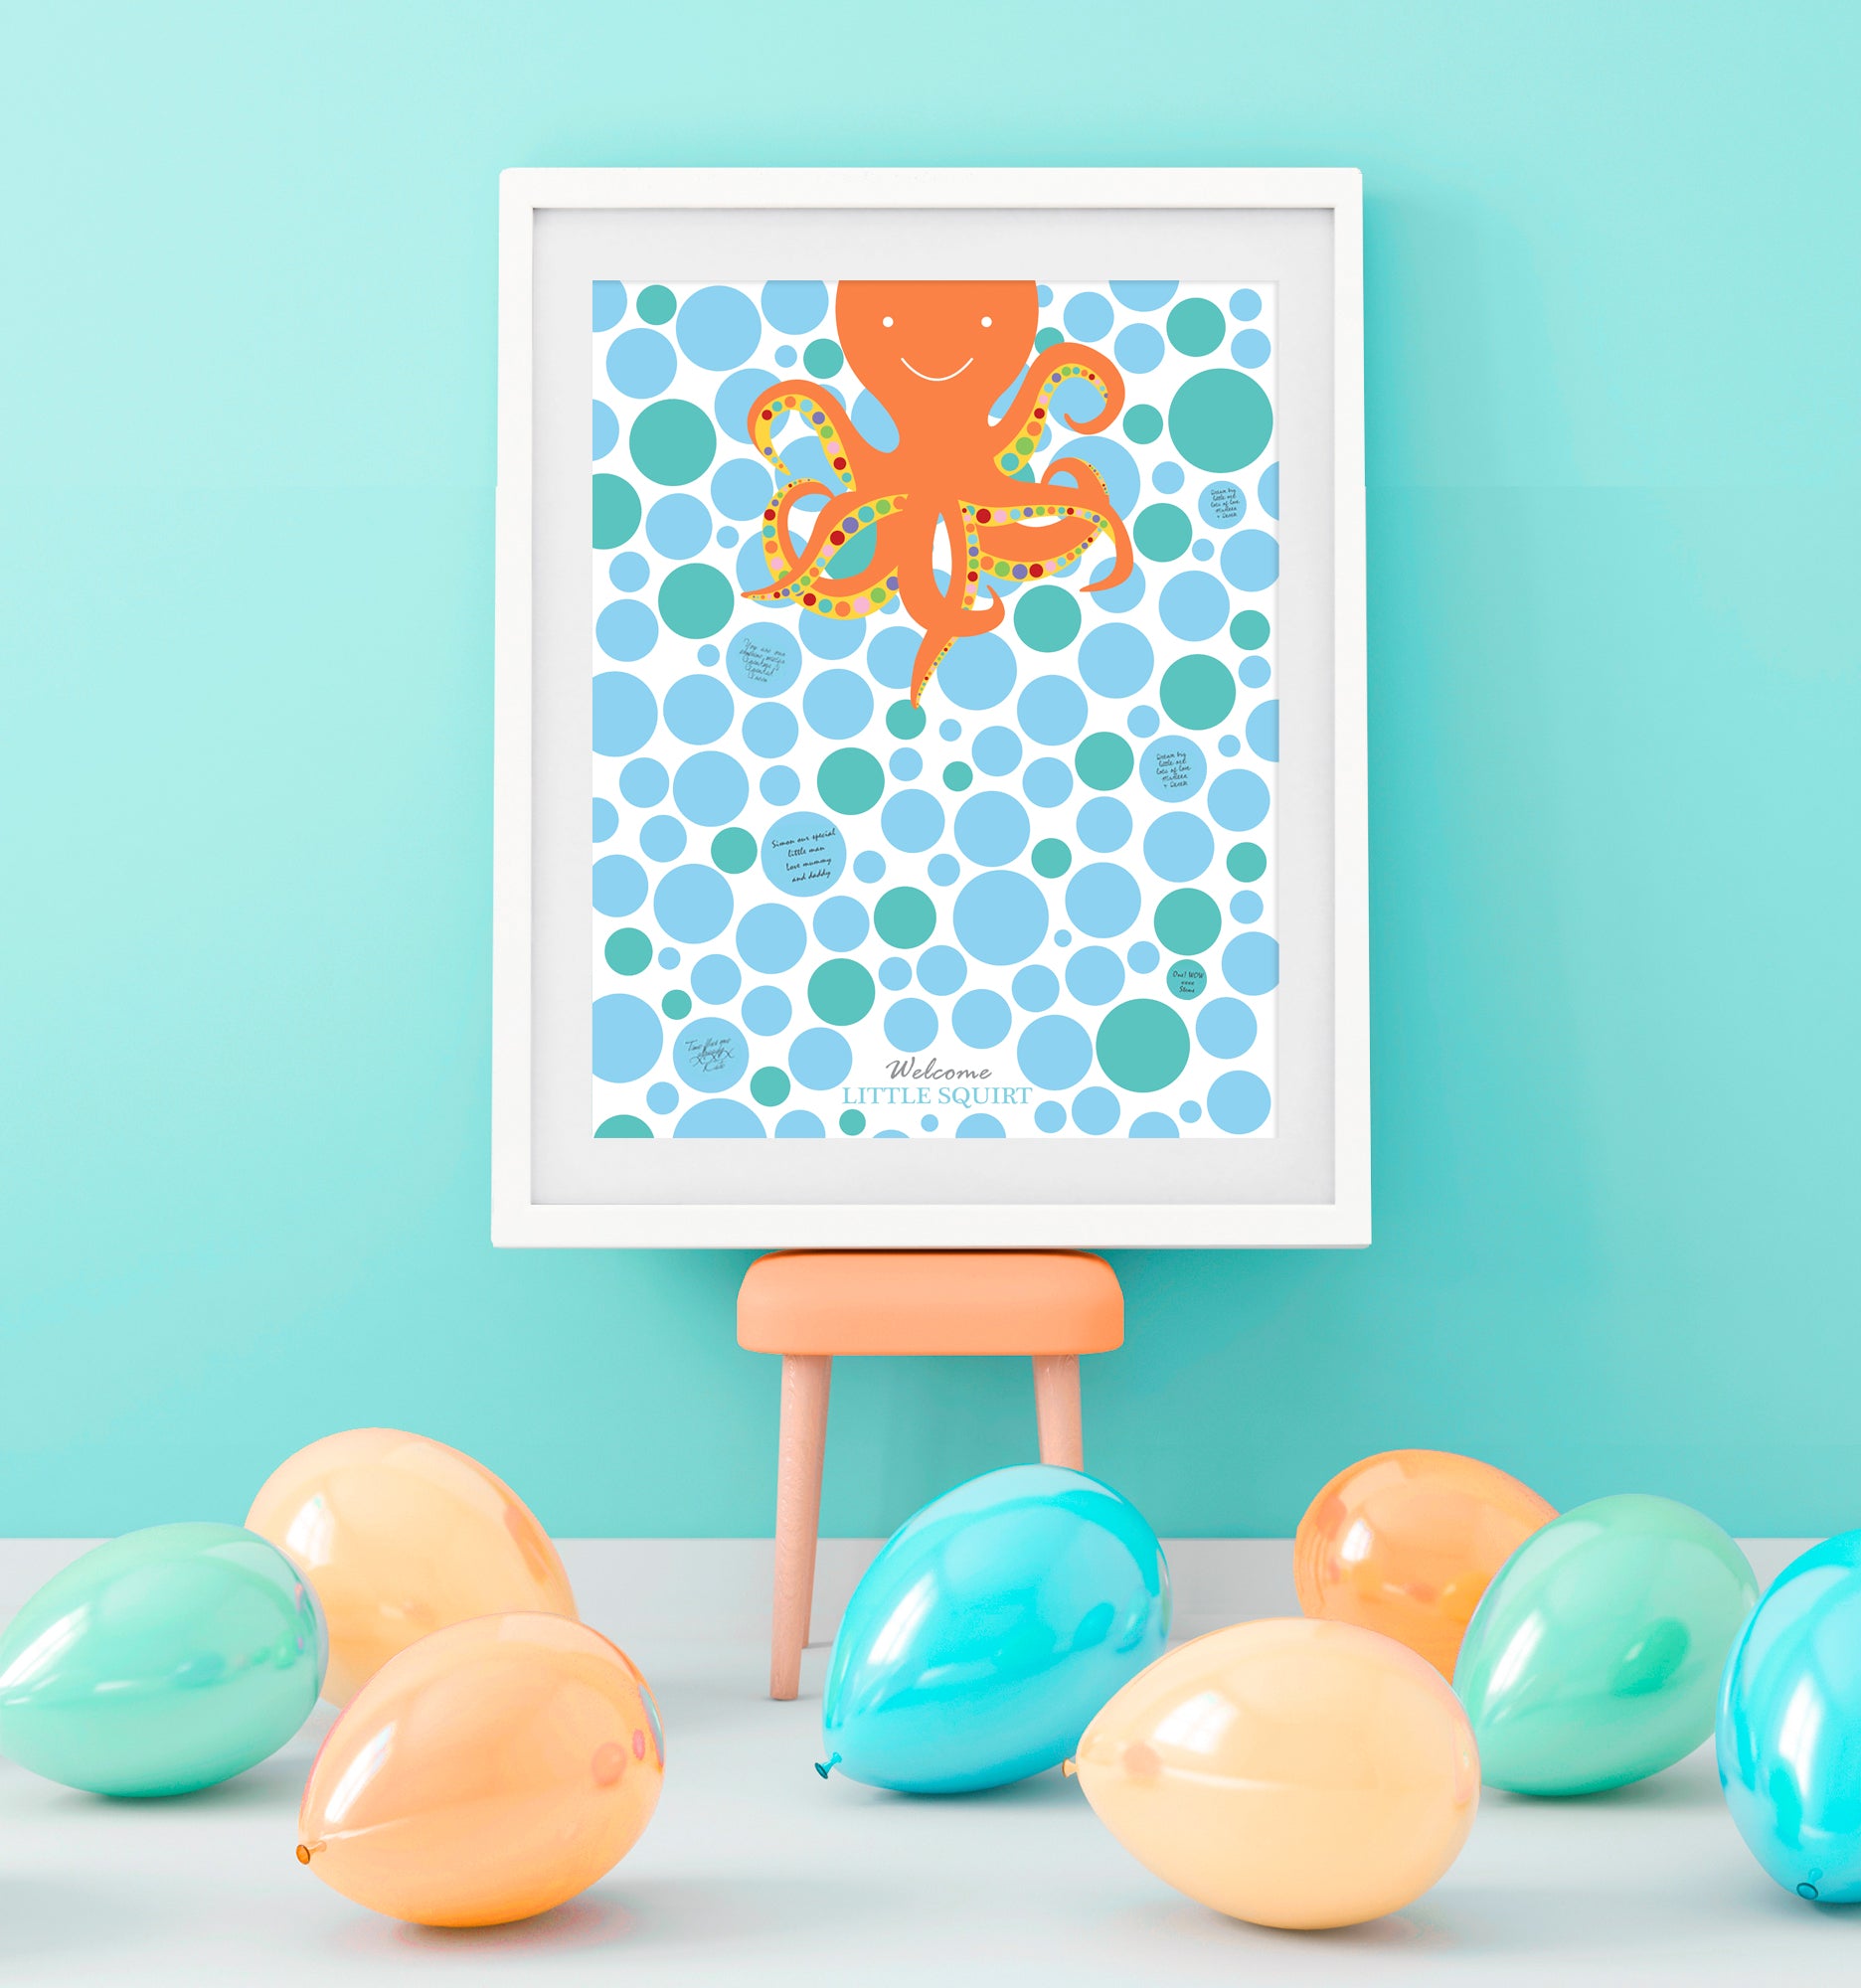 octopus print framed at a baby shower party in turquoise room with balloons